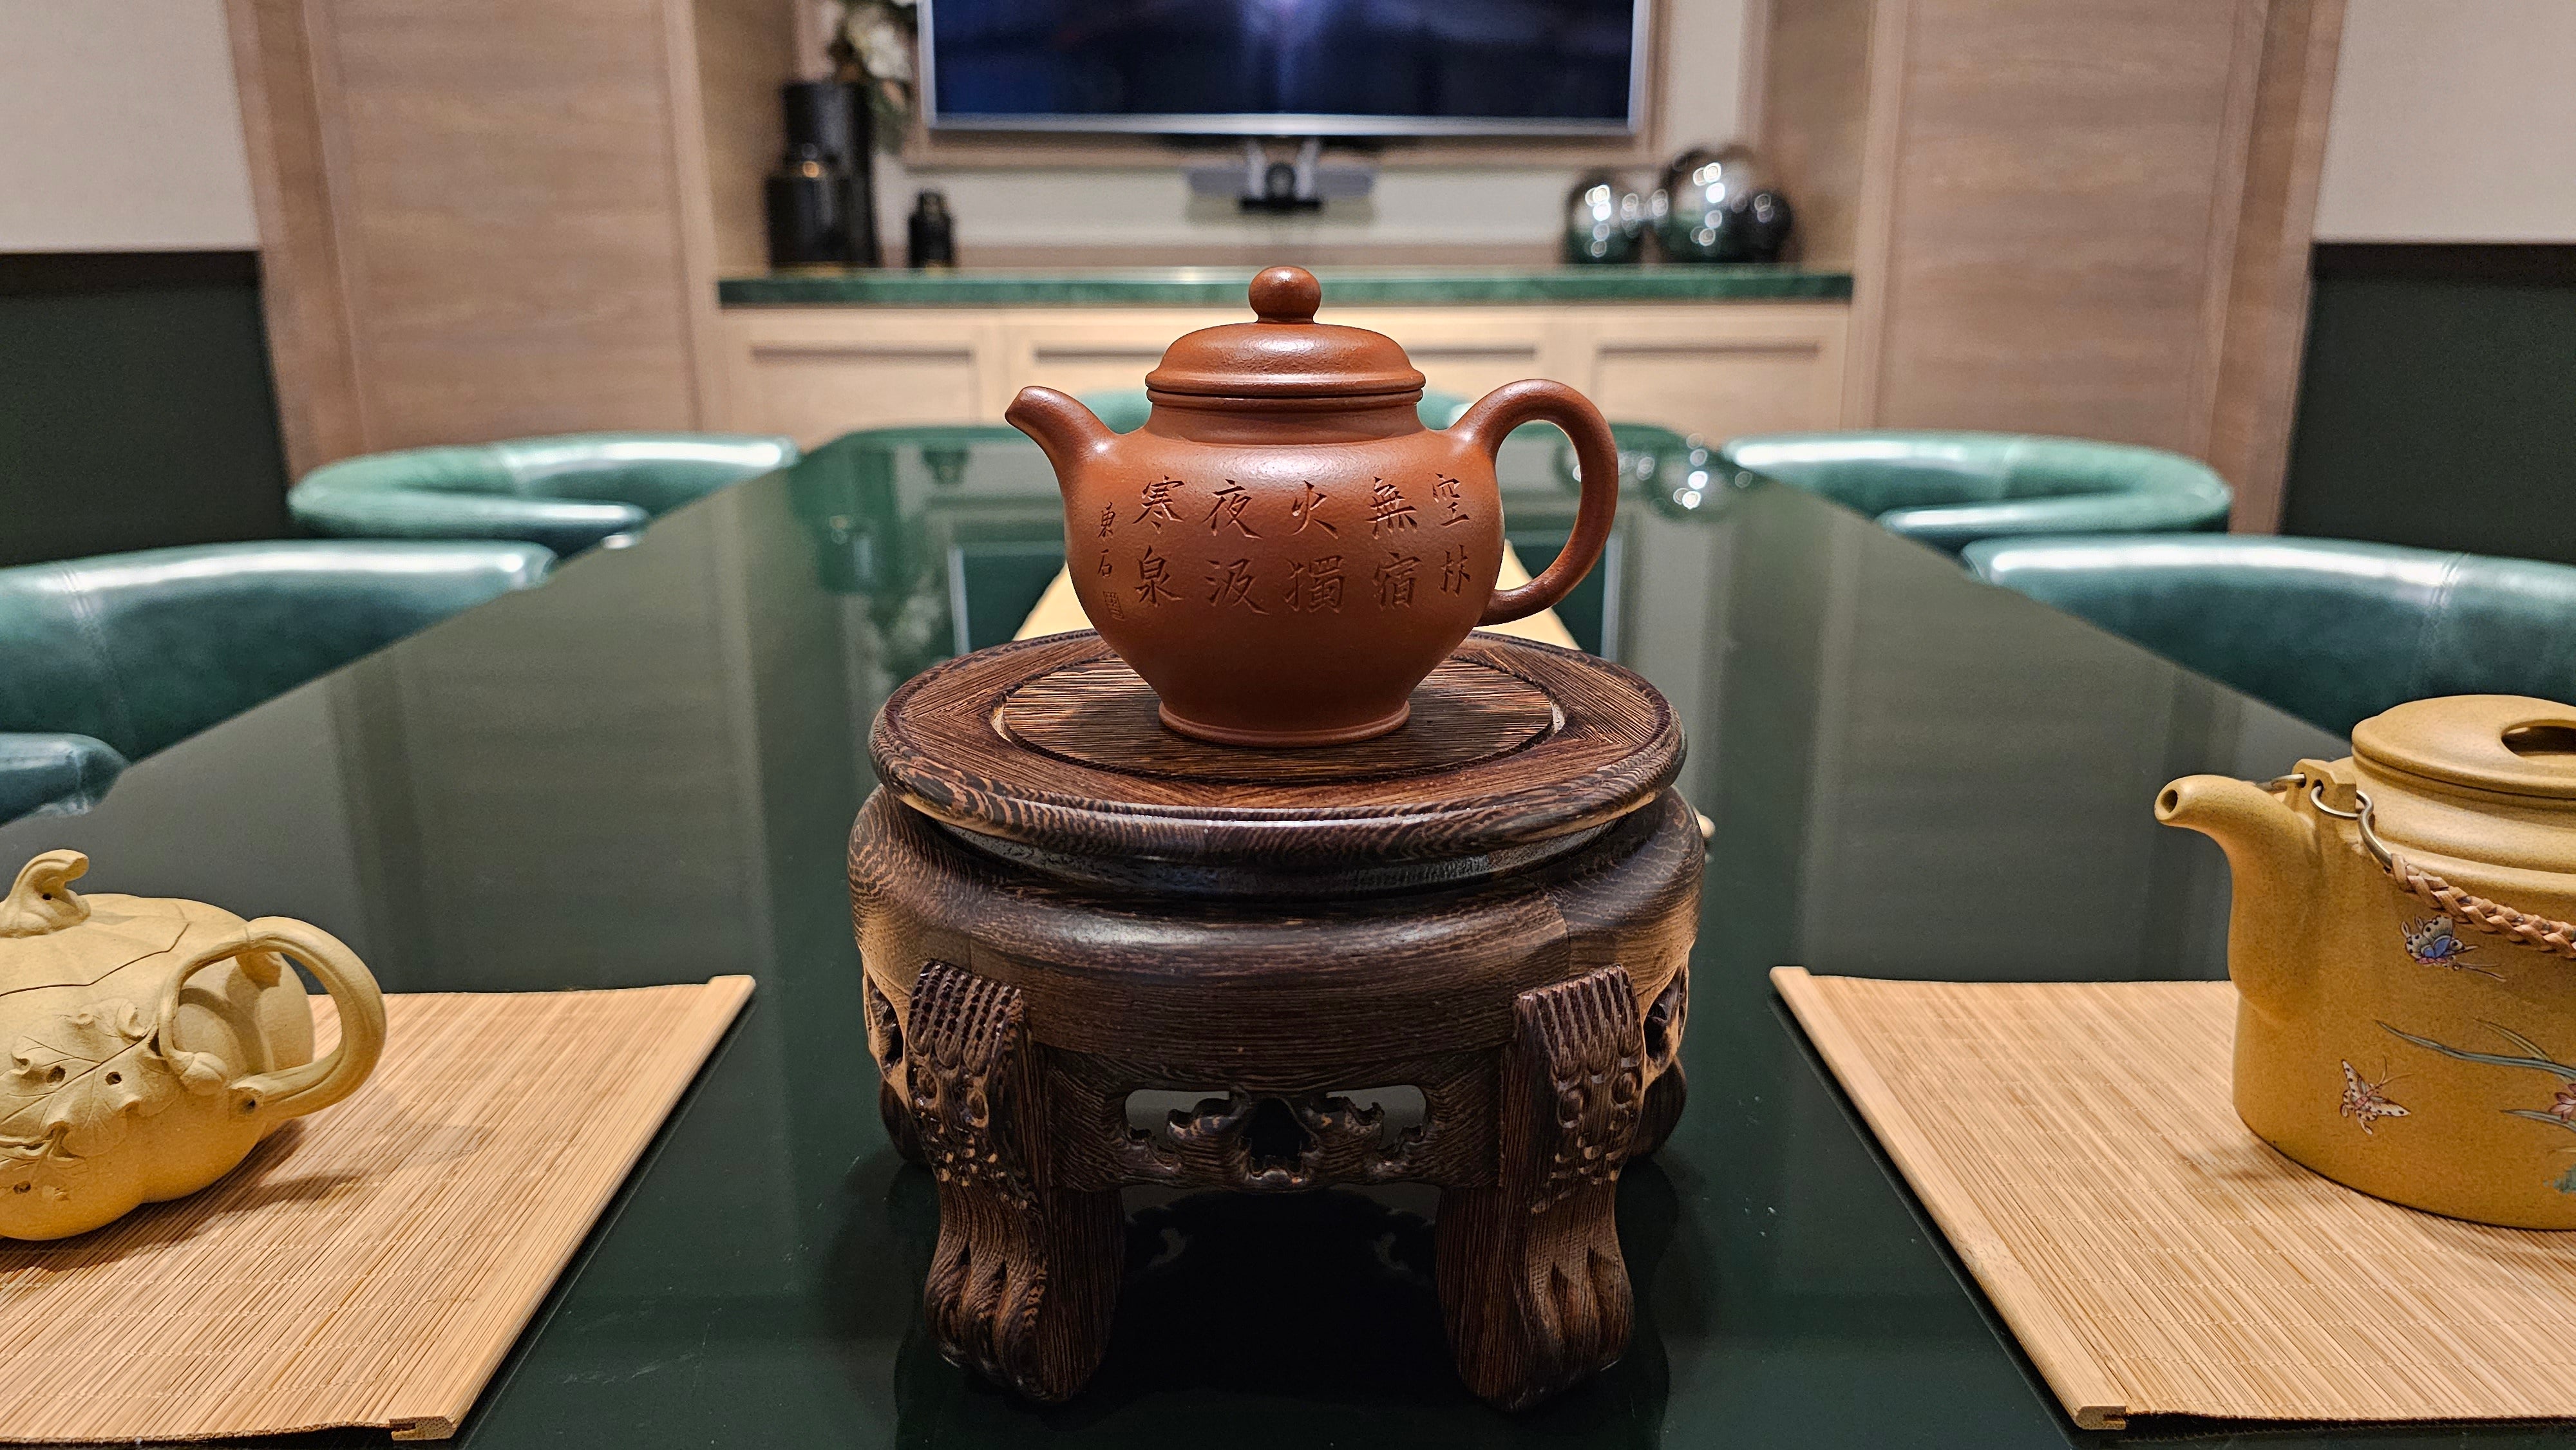 Duo Zhi 掇只, Yuan Kuang Da Hong Pao 原矿大红袍, made by L2 Senior Master Cao Lan Fang 国家高级工艺美术师～曹兰芳。- commissioned in Jan 2022 for our esteemed Patron Prof Griffith (Wales), Shown here for viewing.